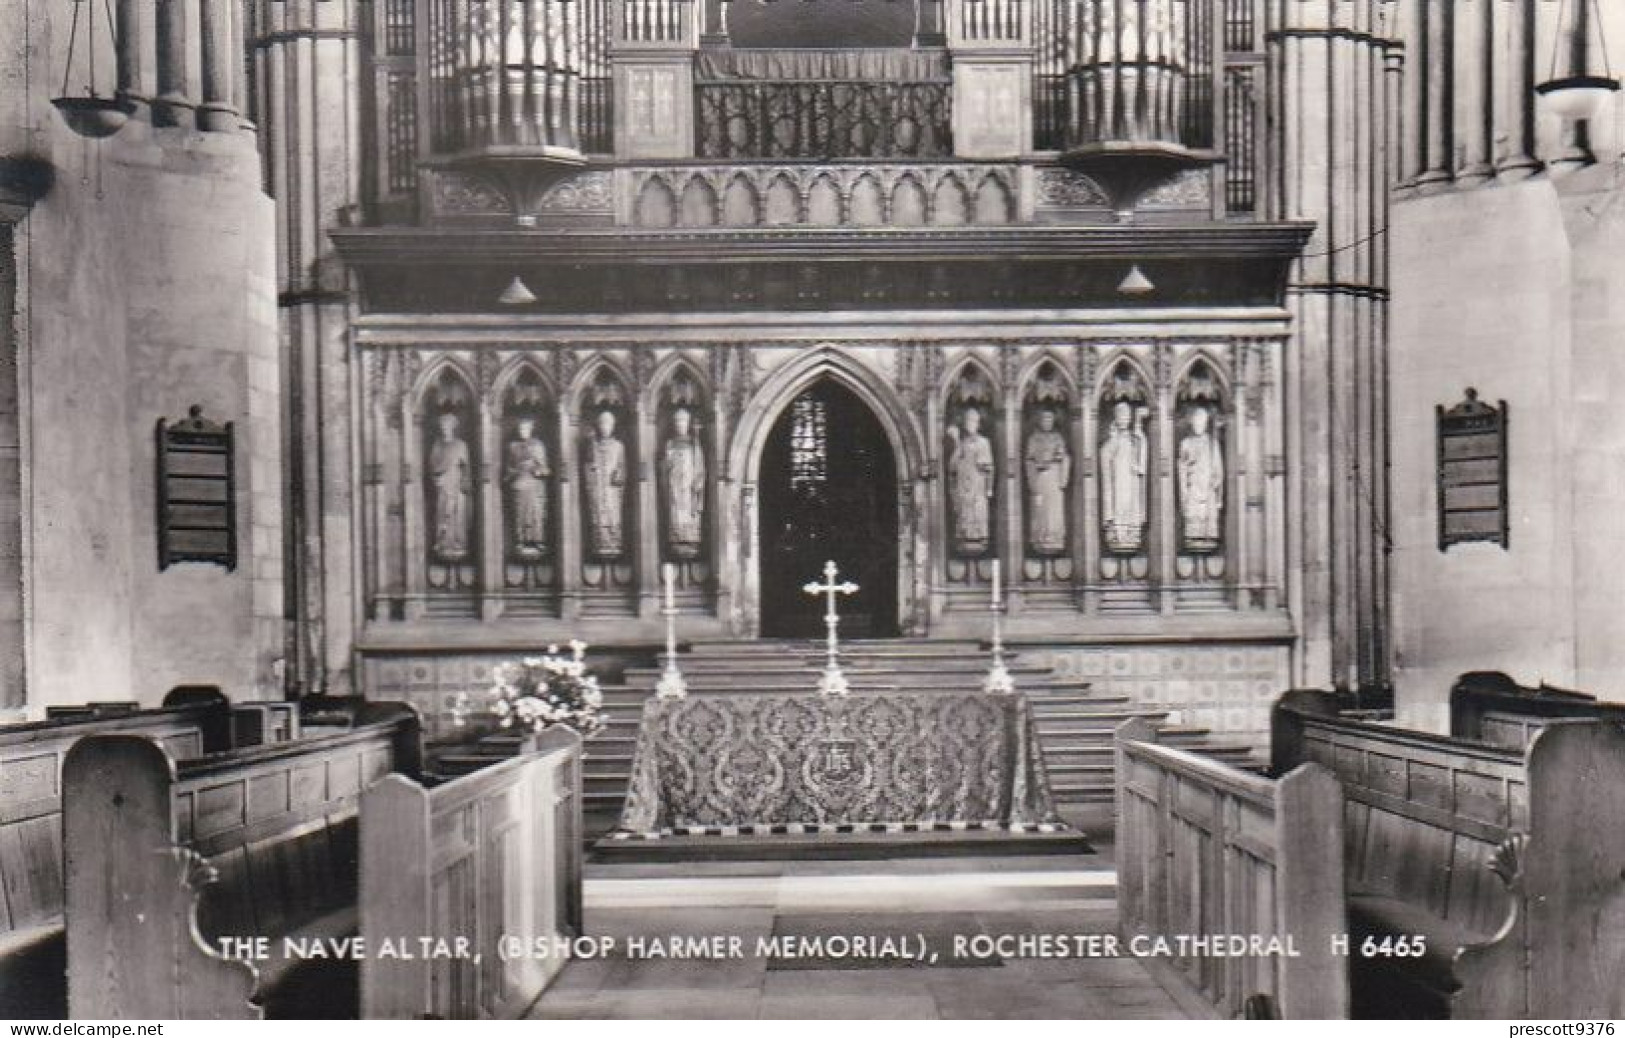 Bishop Harmer Memorial, Rochester Cathedral, From L&NW Railway - Kent, UK   -   Unused Postcard   - K2 - Rochester